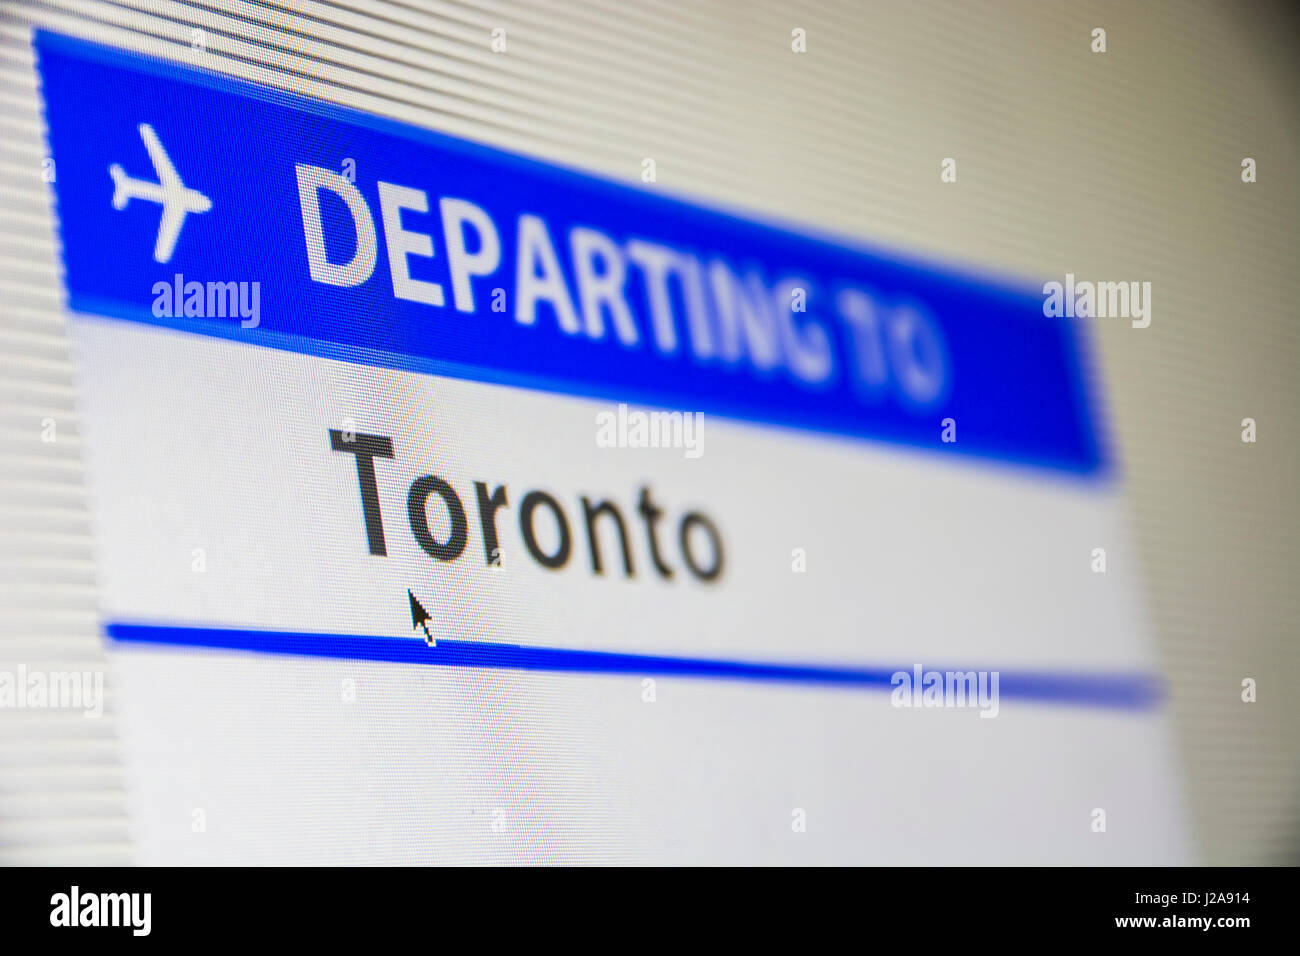 Computer screen close-up of status of flight departing to Toronto, Canada Stock Photo